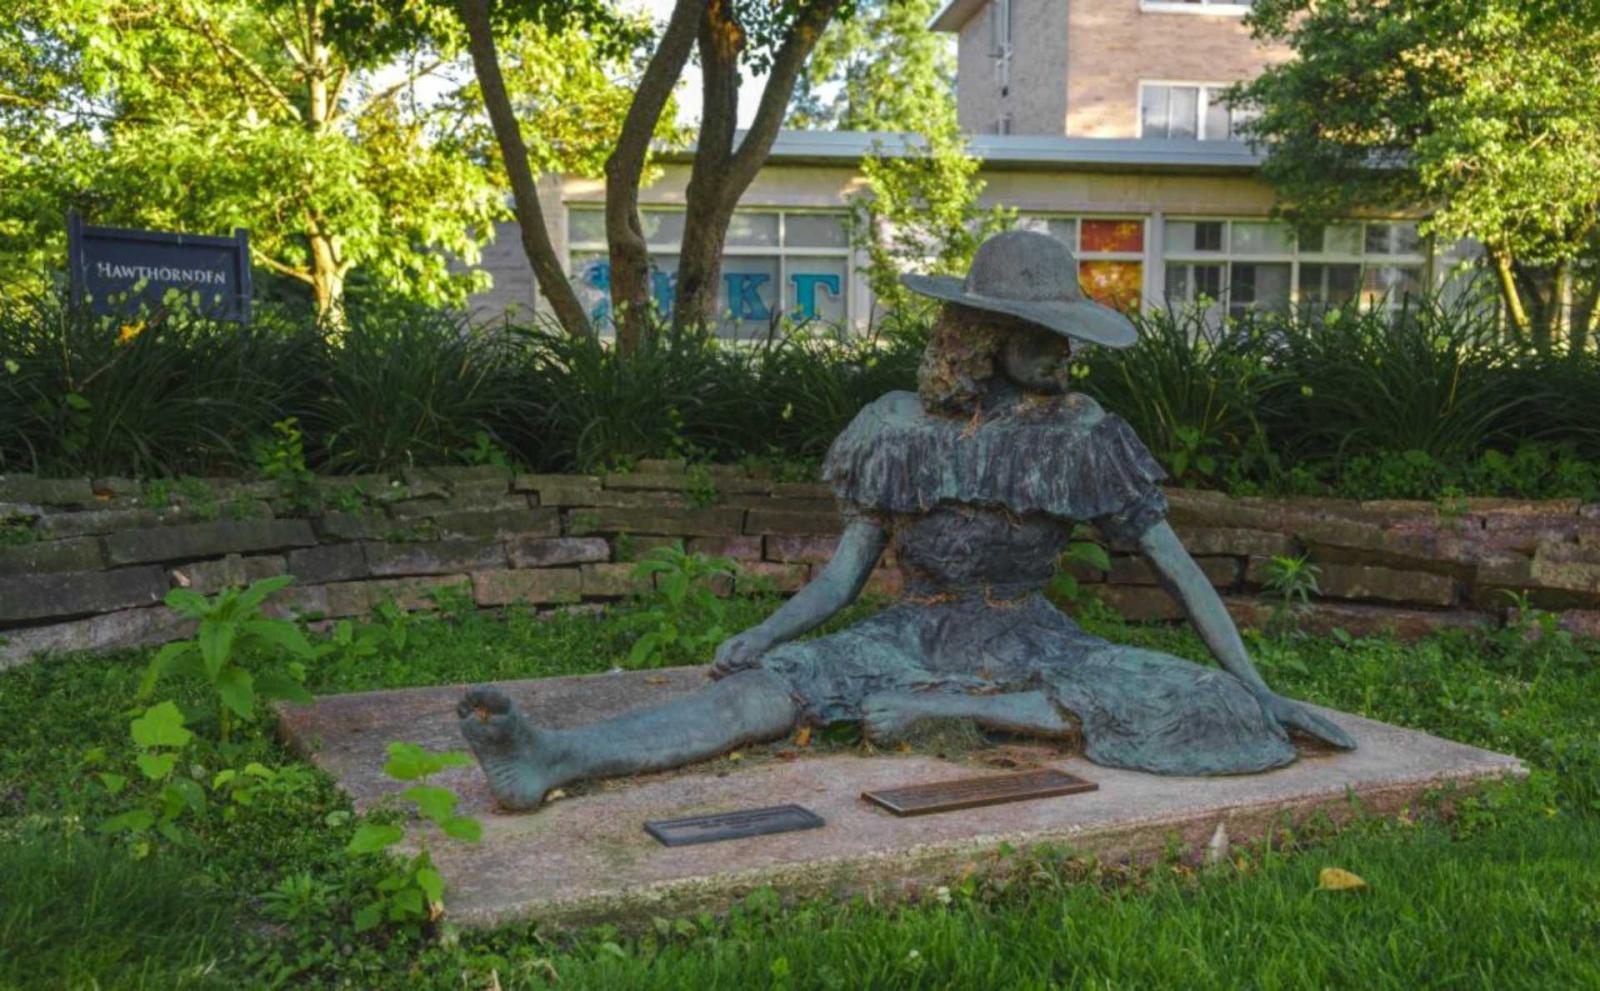 A patinaed metal sculpture of a girl in a dress and hat sitting on the ground